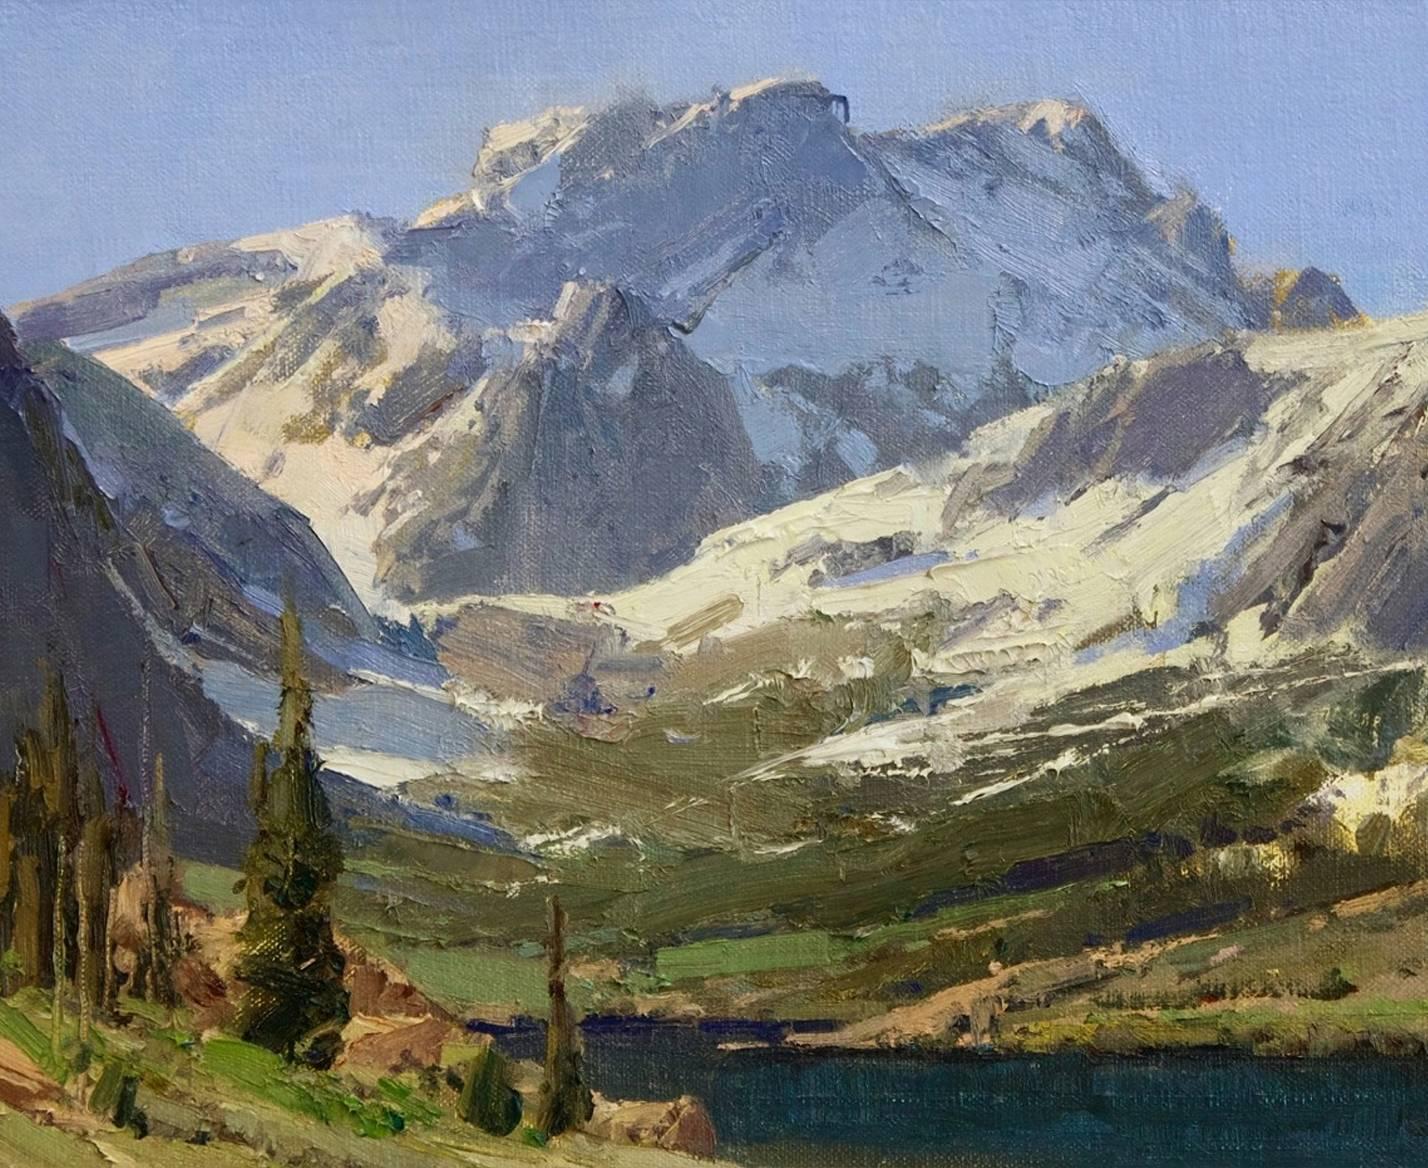 Sierra Ascent; California - Painting by Bill Anton